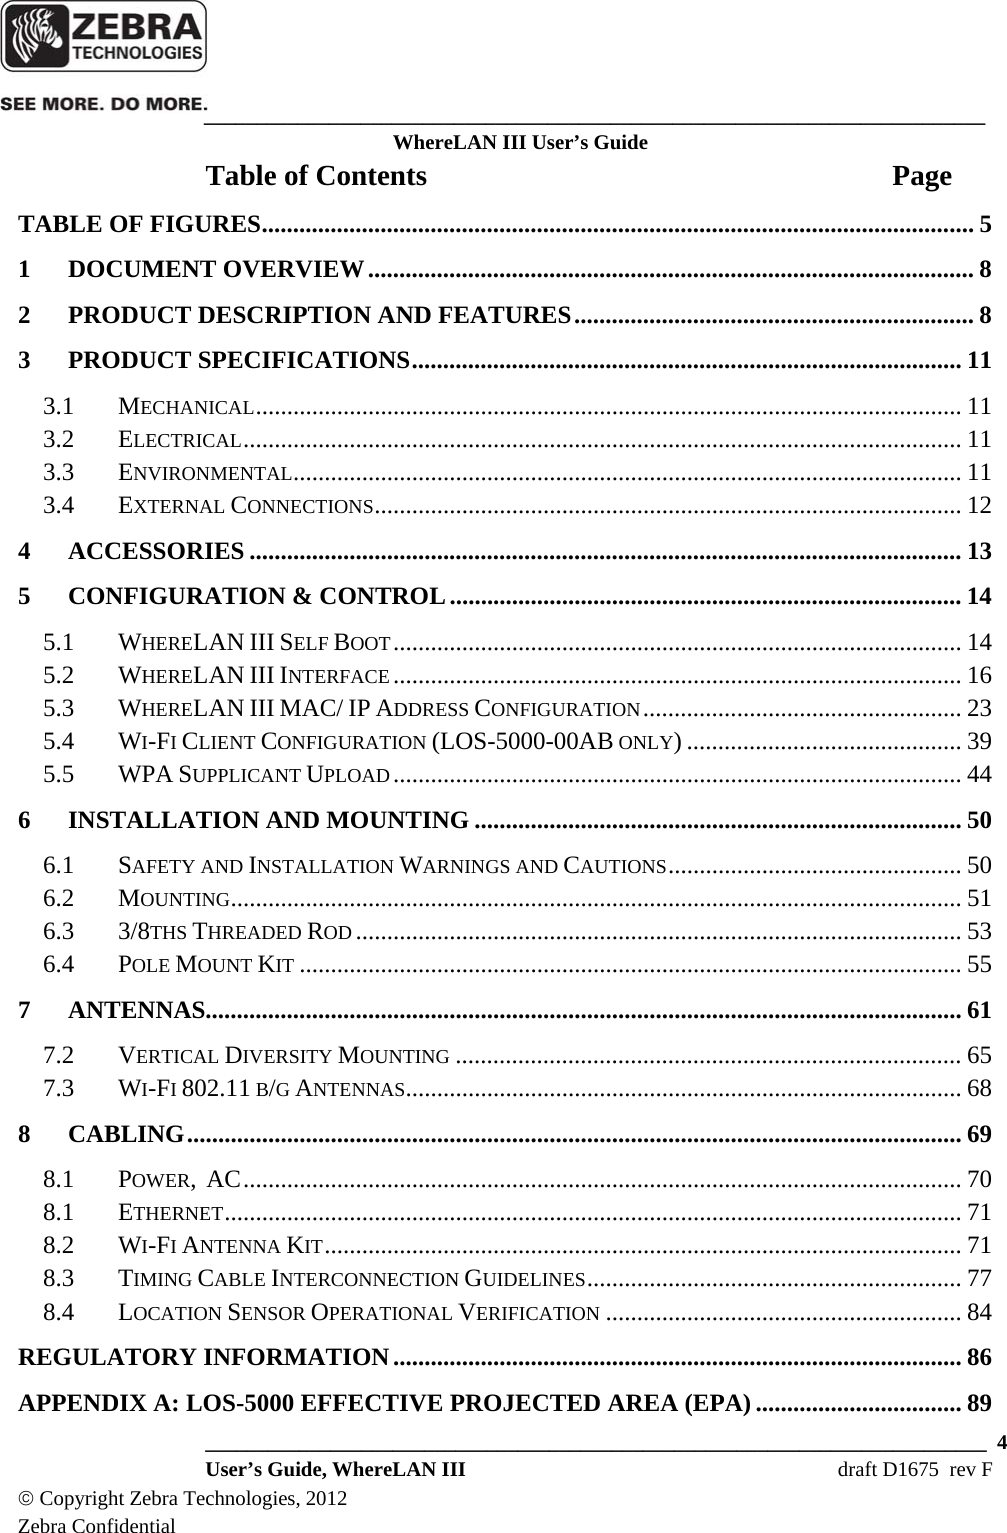    ___________________________________________________________________________ WhereLAN III User’s Guide  ___________________________________________________________________________  4  User’s Guide, WhereLAN III  draft D1675  rev F © Copyright Zebra Technologies, 2012 Zebra Confidential Table of Contents  Page TABLE OF FIGURES .................................................................................................................. 51DOCUMENT OVERVIEW ................................................................................................. 82PRODUCT DESCRIPTION AND FEATURES ................................................................ 83PRODUCT SPECIFICATIONS ........................................................................................ 113.1MECHANICAL .................................................................................................................  113.2ELECTRICAL ...................................................................................................................  113.3ENVIRONMENTAL ...........................................................................................................  113.4EXTERNAL CONNECTIONS ..............................................................................................  124ACCESSORIES .................................................................................................................. 135CONFIGURATION &amp; CONTROL .................................................................................. 145.1WHERELAN III SELF BOOT ........................................................................................... 145.2WHERELAN III INTERFACE ........................................................................................... 165.3WHERELAN III MAC/ IP ADDRESS CONFIGURATION ................................................... 235.4WI-FI CLIENT CONFIGURATION (LOS-5000-00AB ONLY) ............................................ 395.5WPA SUPPLICANT UPLOAD ...........................................................................................  446INSTALLATION AND MOUNTING .............................................................................. 506.1SAFETY AND INSTALLATION WARNINGS AND CAUTIONS ...............................................  506.2MOUNTING .....................................................................................................................  516.33/8THS THREADED ROD ................................................................................................. 536.4POLE MOUNT KIT .......................................................................................................... 557ANTENNAS......................................................................................................................... 617.2VERTICAL DIVERSITY MOUNTING ................................................................................. 657.3WI-FI 802.11 B/G ANTENNAS......................................................................................... 688CABLING ............................................................................................................................ 698.1POWER,  AC ................................................................................................................... 708.1ETHERNET ......................................................................................................................  718.2WI-FI ANTENNA KIT ...................................................................................................... 718.3TIMING CABLE INTERCONNECTION GUIDELINES ............................................................  778.4LOCATION SENSOR OPERATIONAL VERIFICATION ......................................................... 84REGULATORY INFORMATION ........................................................................................... 86APPENDIX A: LOS-5000 EFFECTIVE PROJECTED AREA (EPA) ................................. 89